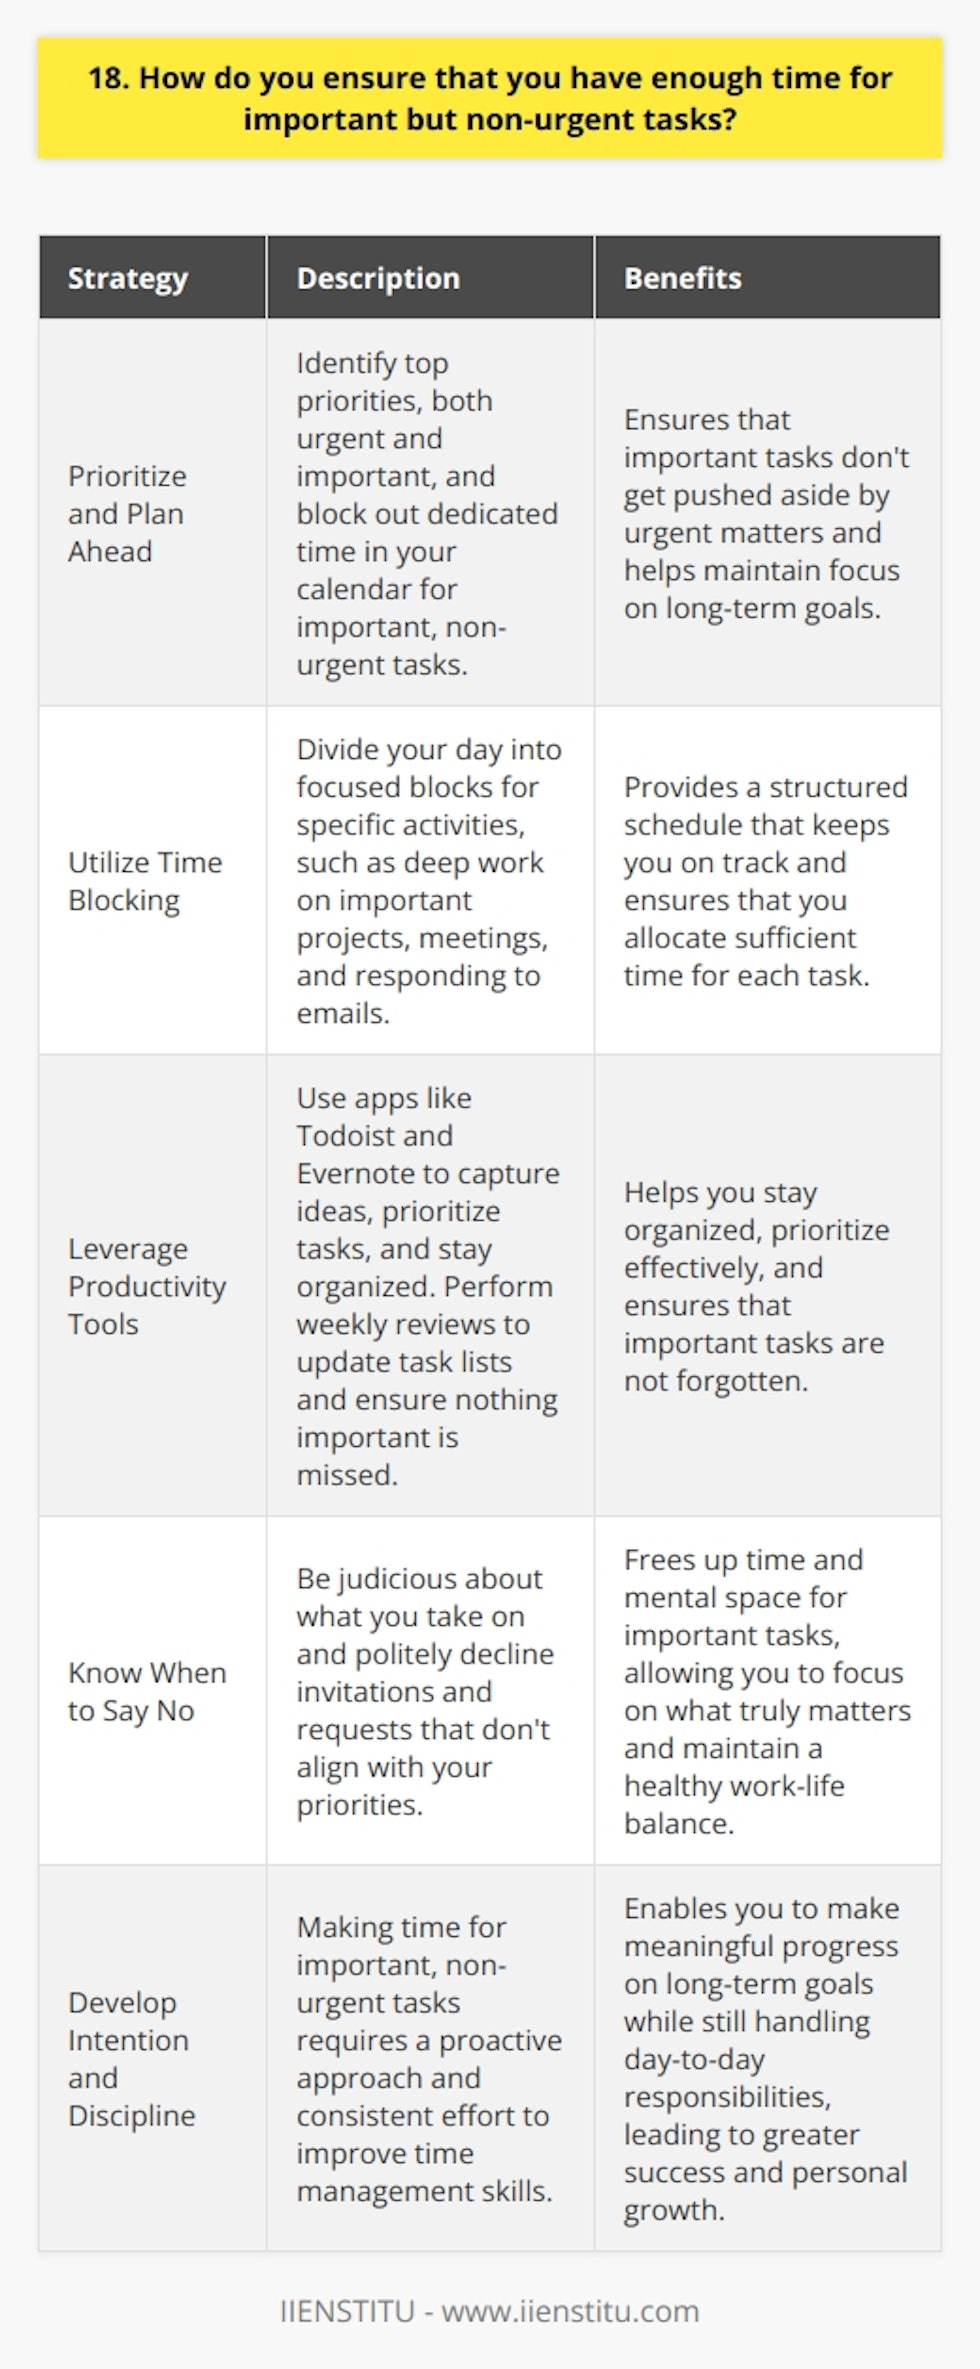 Ensuring enough time for important but non-urgent tasks is crucial for long-term success and personal growth. Here are some strategies I use to make sure these tasks dont fall by the wayside: Prioritize and Plan Ahead I start each week by identifying my top priorities, both urgent and important. I block out dedicated time in my calendar for the important, non-urgent items like strategic planning, learning, and relationship building. Treating these tasks as unmovable appointments helps ensure they dont get pushed aside by the tyranny of the urgent. Utilize Time Blocking Time blocking has been a game-changer for me. I divide my day into focused blocks for specific activities. For example, I might set aside 9-11am for deep work on an important project, 2-3pm for meetings, and 4-5pm for responding to emails and tying up loose ends. Having a structured schedule keeps me on track. Leverage Productivity Tools Im a big fan of productivity apps like Todoist and Evernote. They help me capture ideas, prioritize tasks, and stay organized. I do a weekly review to update my task list and make sure nothing important slips through the cracks. Technology is a great aid, but the key is developing a consistent system you can stick with. Know When to Say No Part of managing your time effectively is being judicious about what you take on. Ive learned to politely decline invitations and requests that dont align with my priorities. Its about respecting your own time and boundaries. Saying no to the unimportant things frees up space for what really matters. At the end of the day, making time for important, non-urgent tasks comes down to intention and discipline. Its a skill Im always working to improve. Ive found that when Im proactive about tending to these items, Im able to make meaningful progress on my long-term goals while still handling day-to-day responsibilities. Its a balancing act, but a worthwhile one.